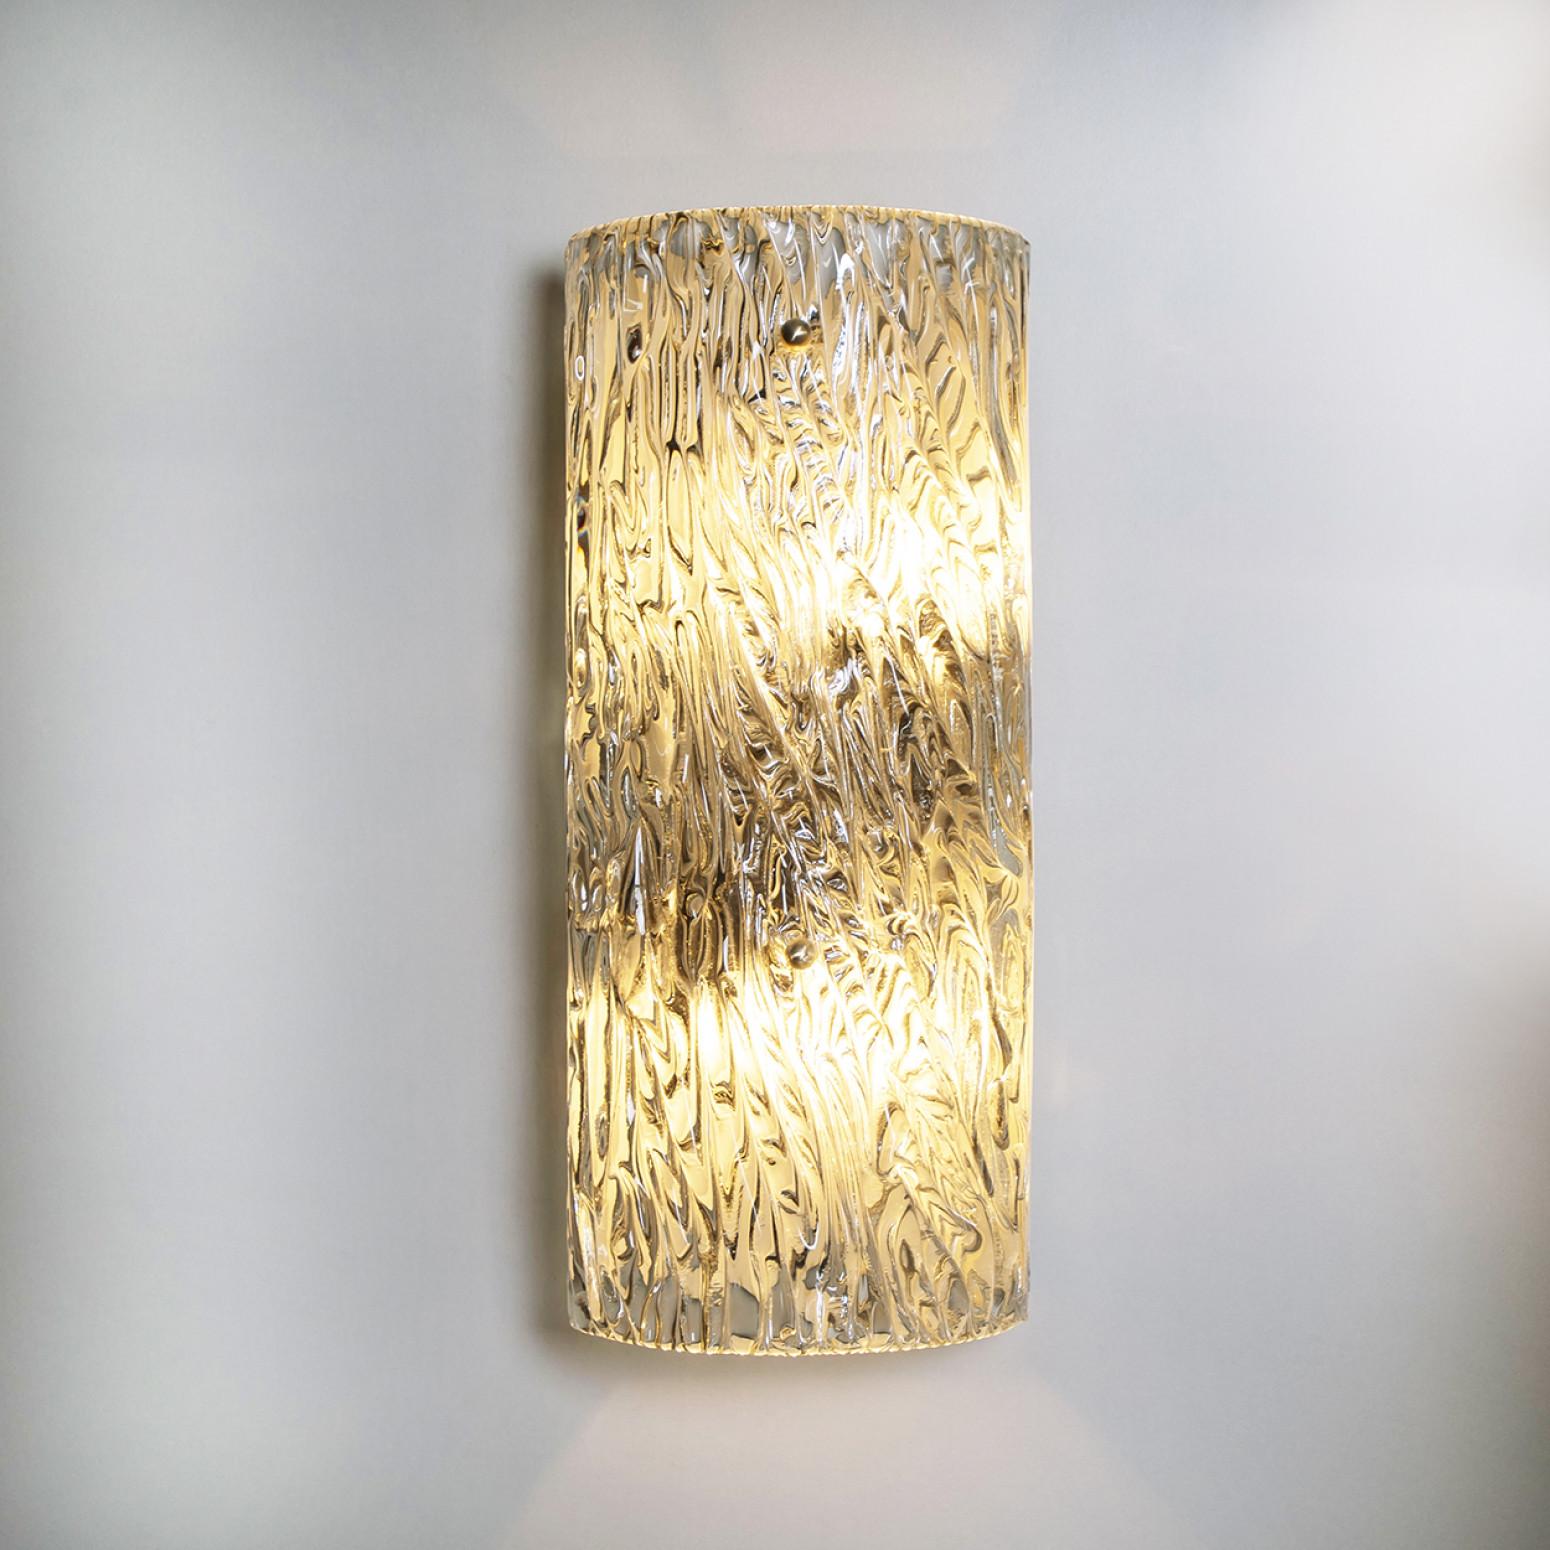 One of Four Large Modern Brass Ice Glass Wall Lights by J. T. Kalmar, 1960s For Sale 1